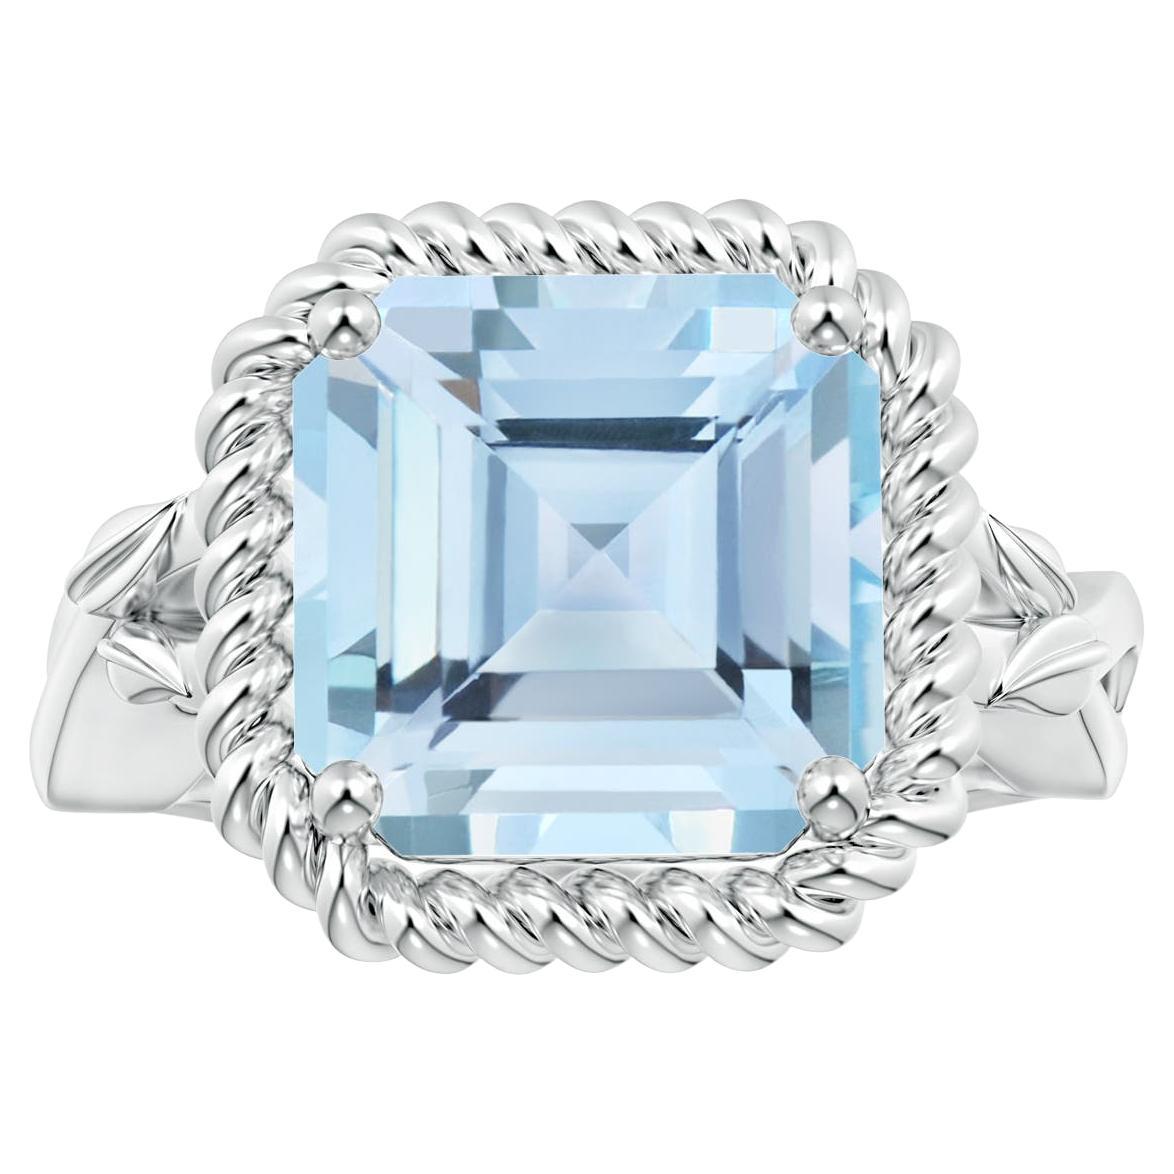 For Sale:  Angara Gia Certified Square Emerald-Cut Aquamarine Ring in White Gold with Halo